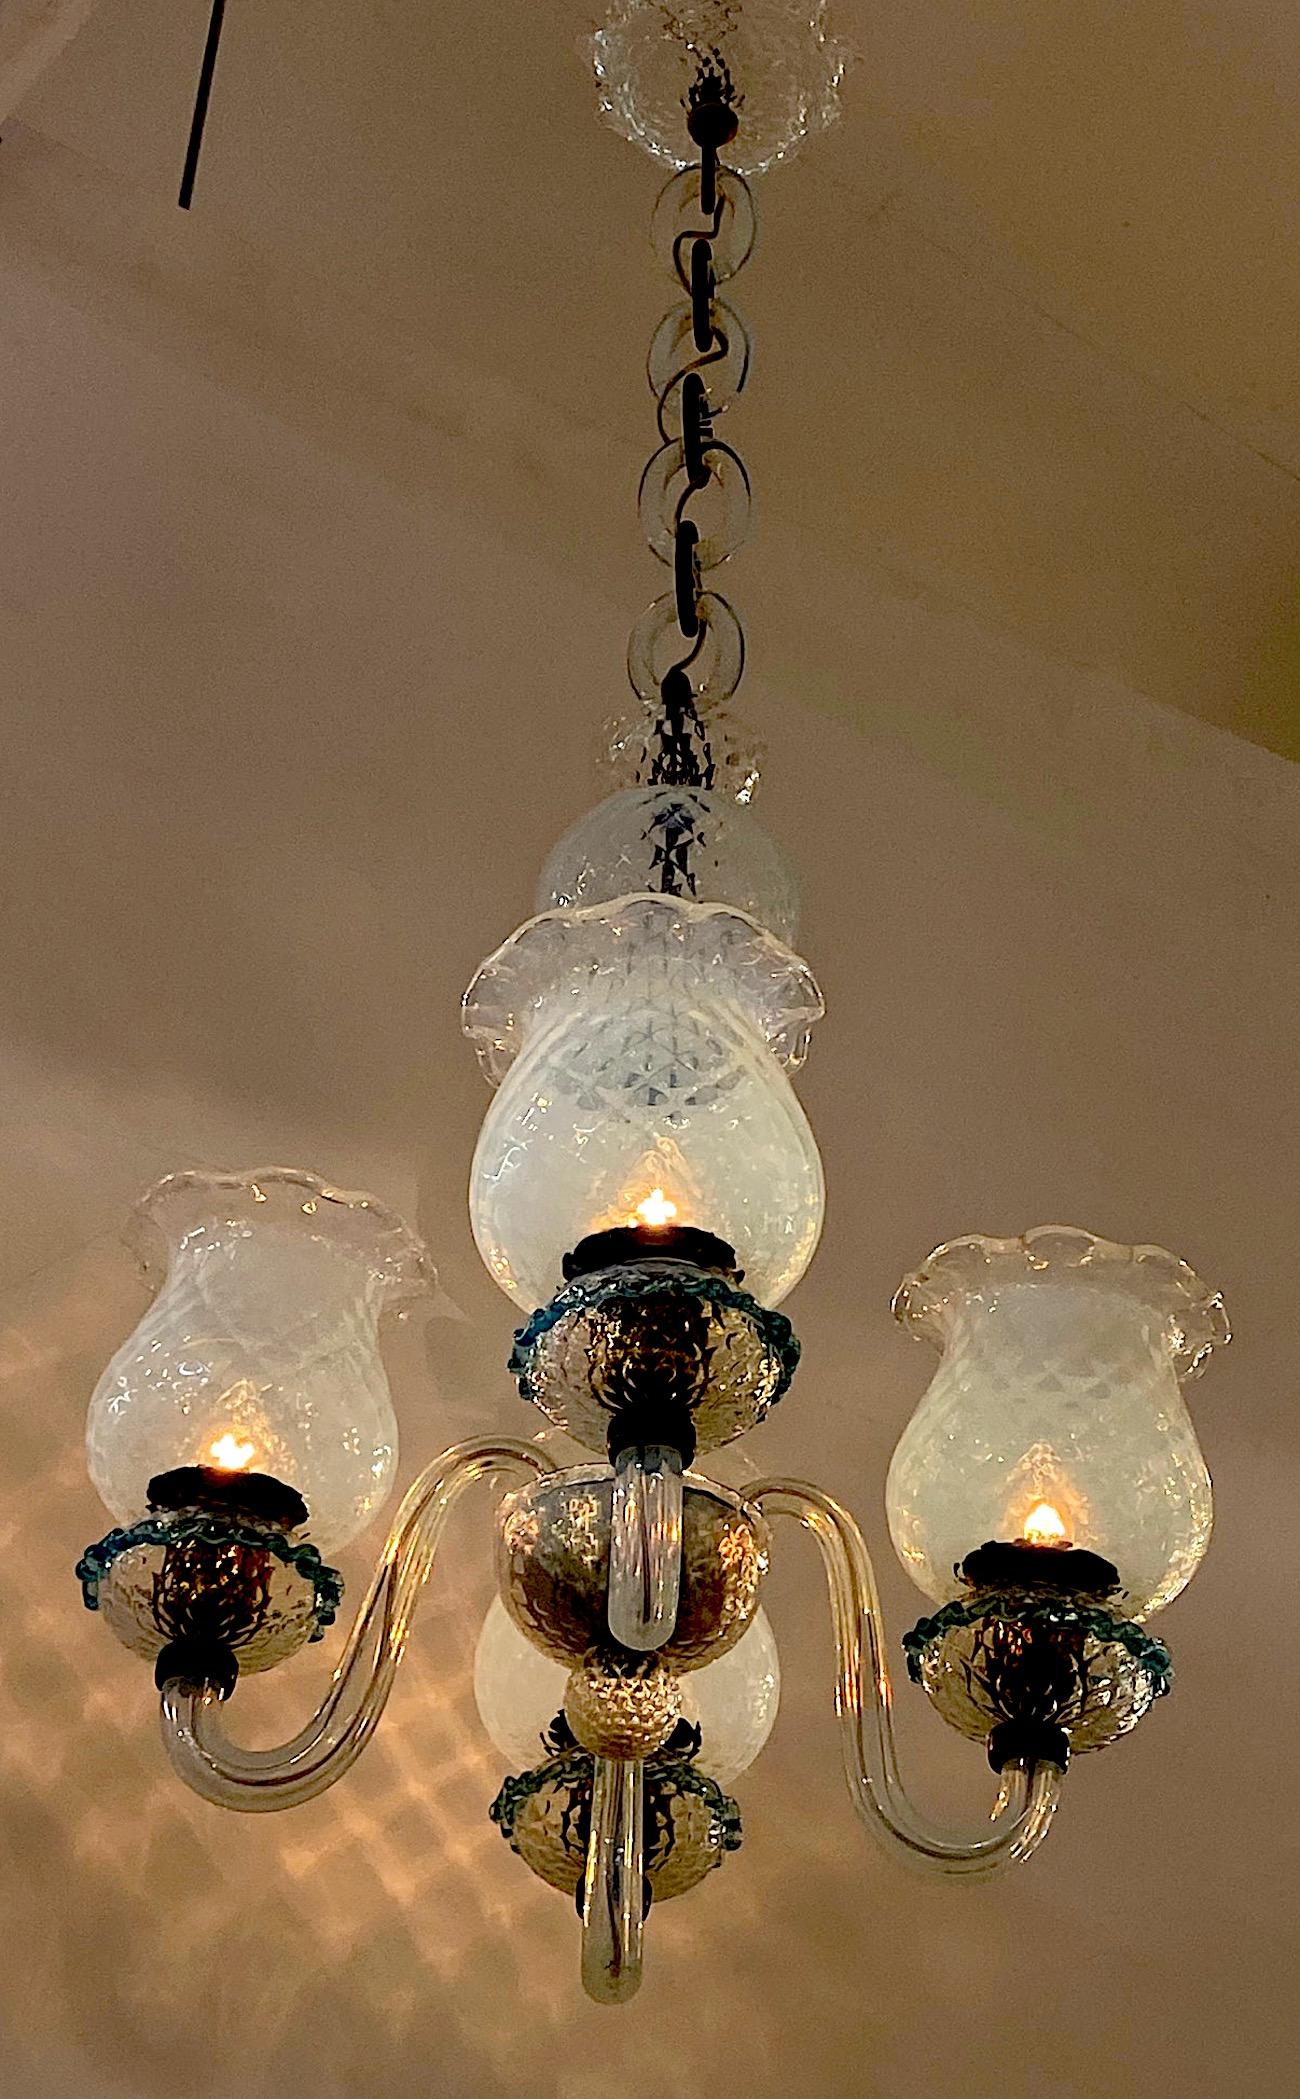 A truly beautiful example of a midcentury Italian blown glass chandelier attributed to the Seguso glass house. The chandelier is comprised of light and transparent opal color glass pieces individually hand blown. The shades and ball shape pieces